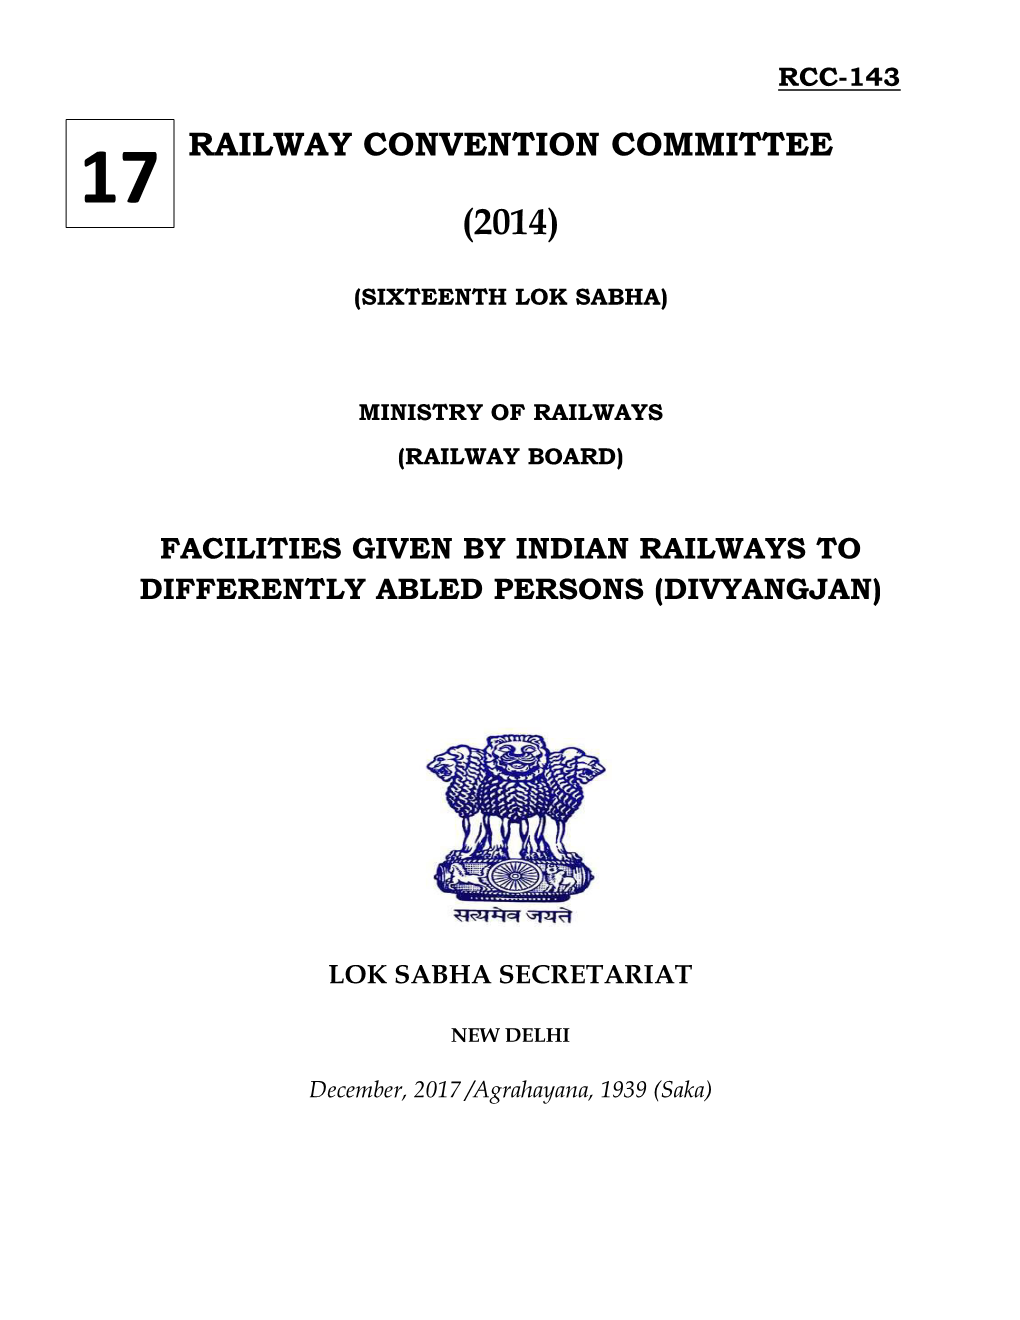 Railway Convention Committee (2014)